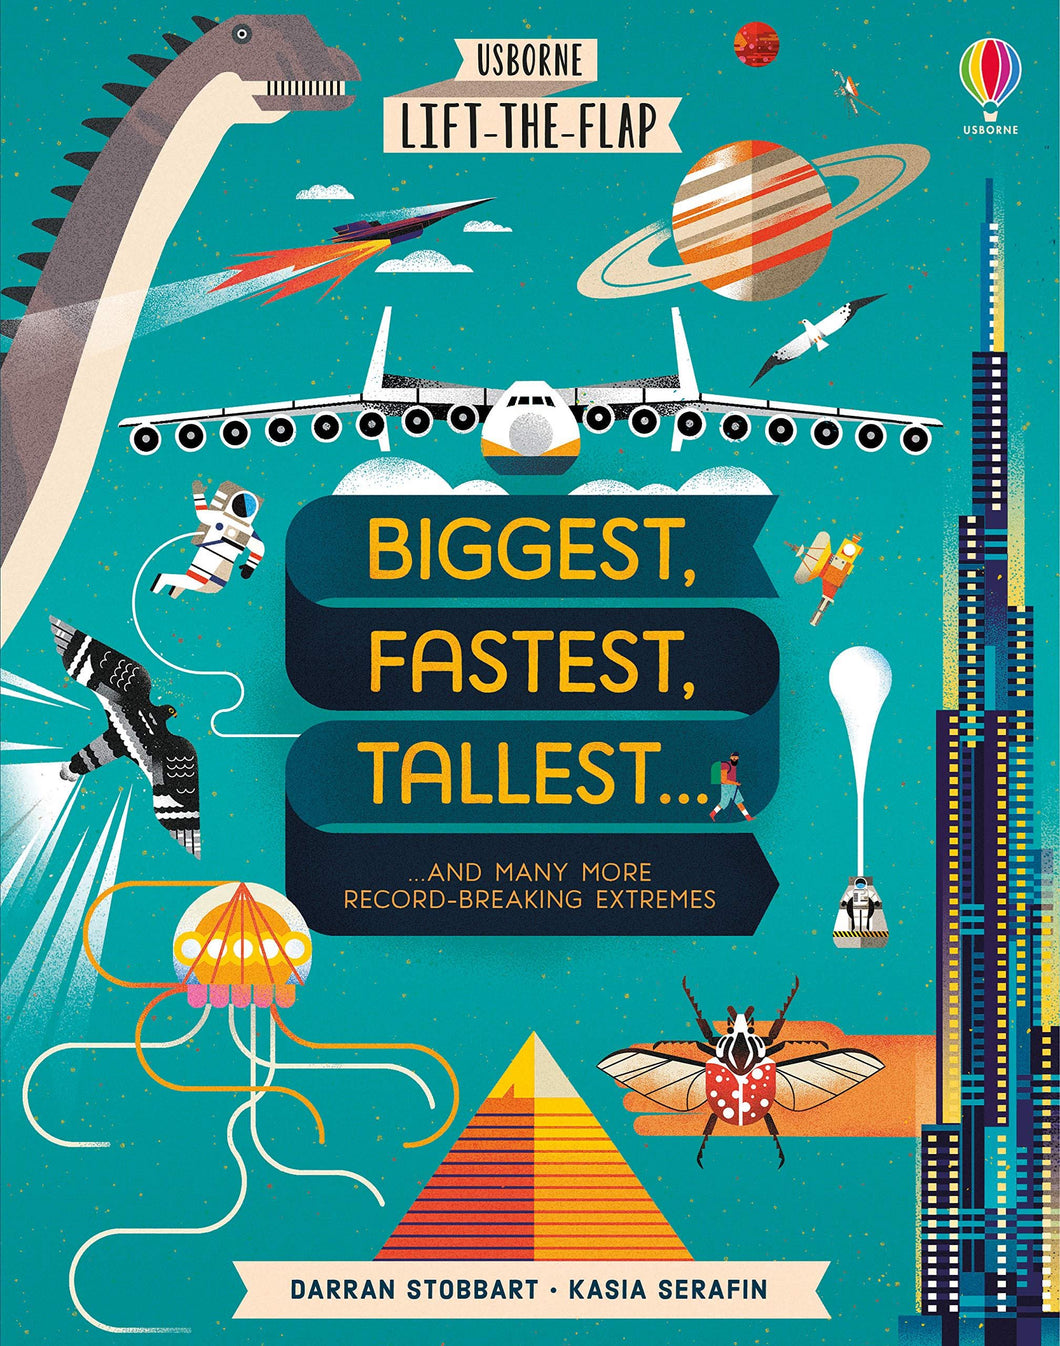 Biggest Fastest Tallest Lift the Flap Book by Darran Stobart and Kasia Serafin